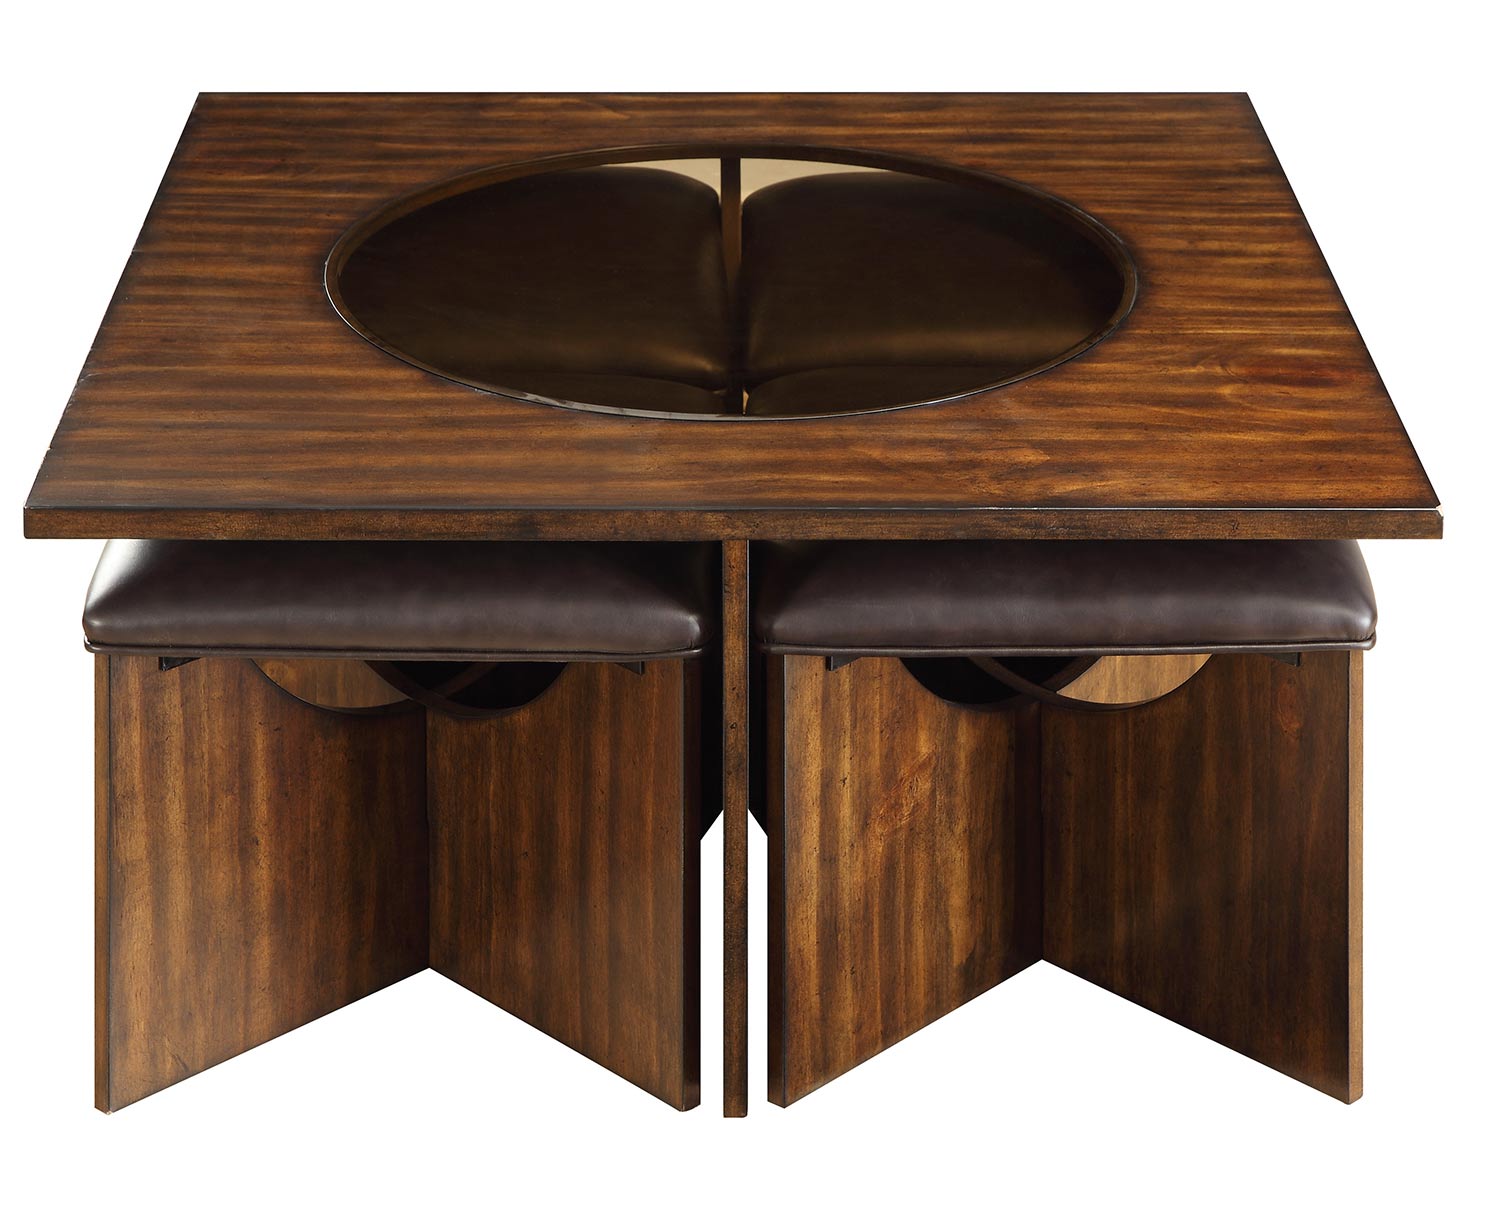 Homelegance Akita Cocktail/Coffee Table with Four Stools - Cherry